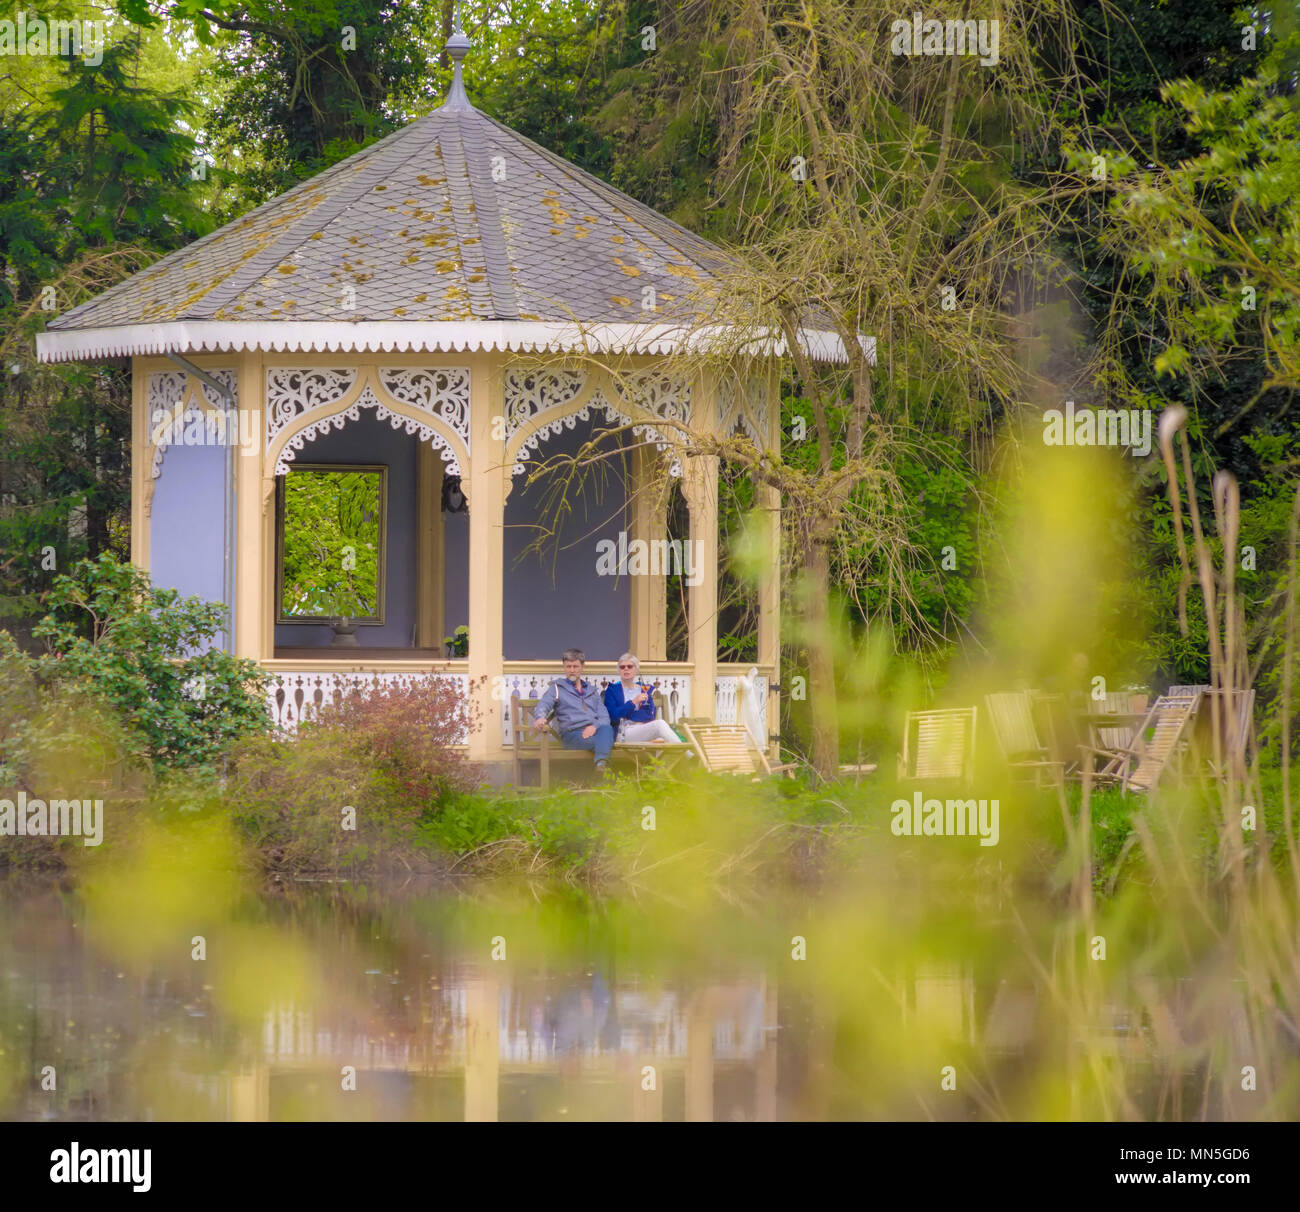 Celle, Lower Saxony, Germany, April 28, 2018: A couple sitting on a bench in front of an old-fashioned little pavilion in a public garden, intensional Stock Photo